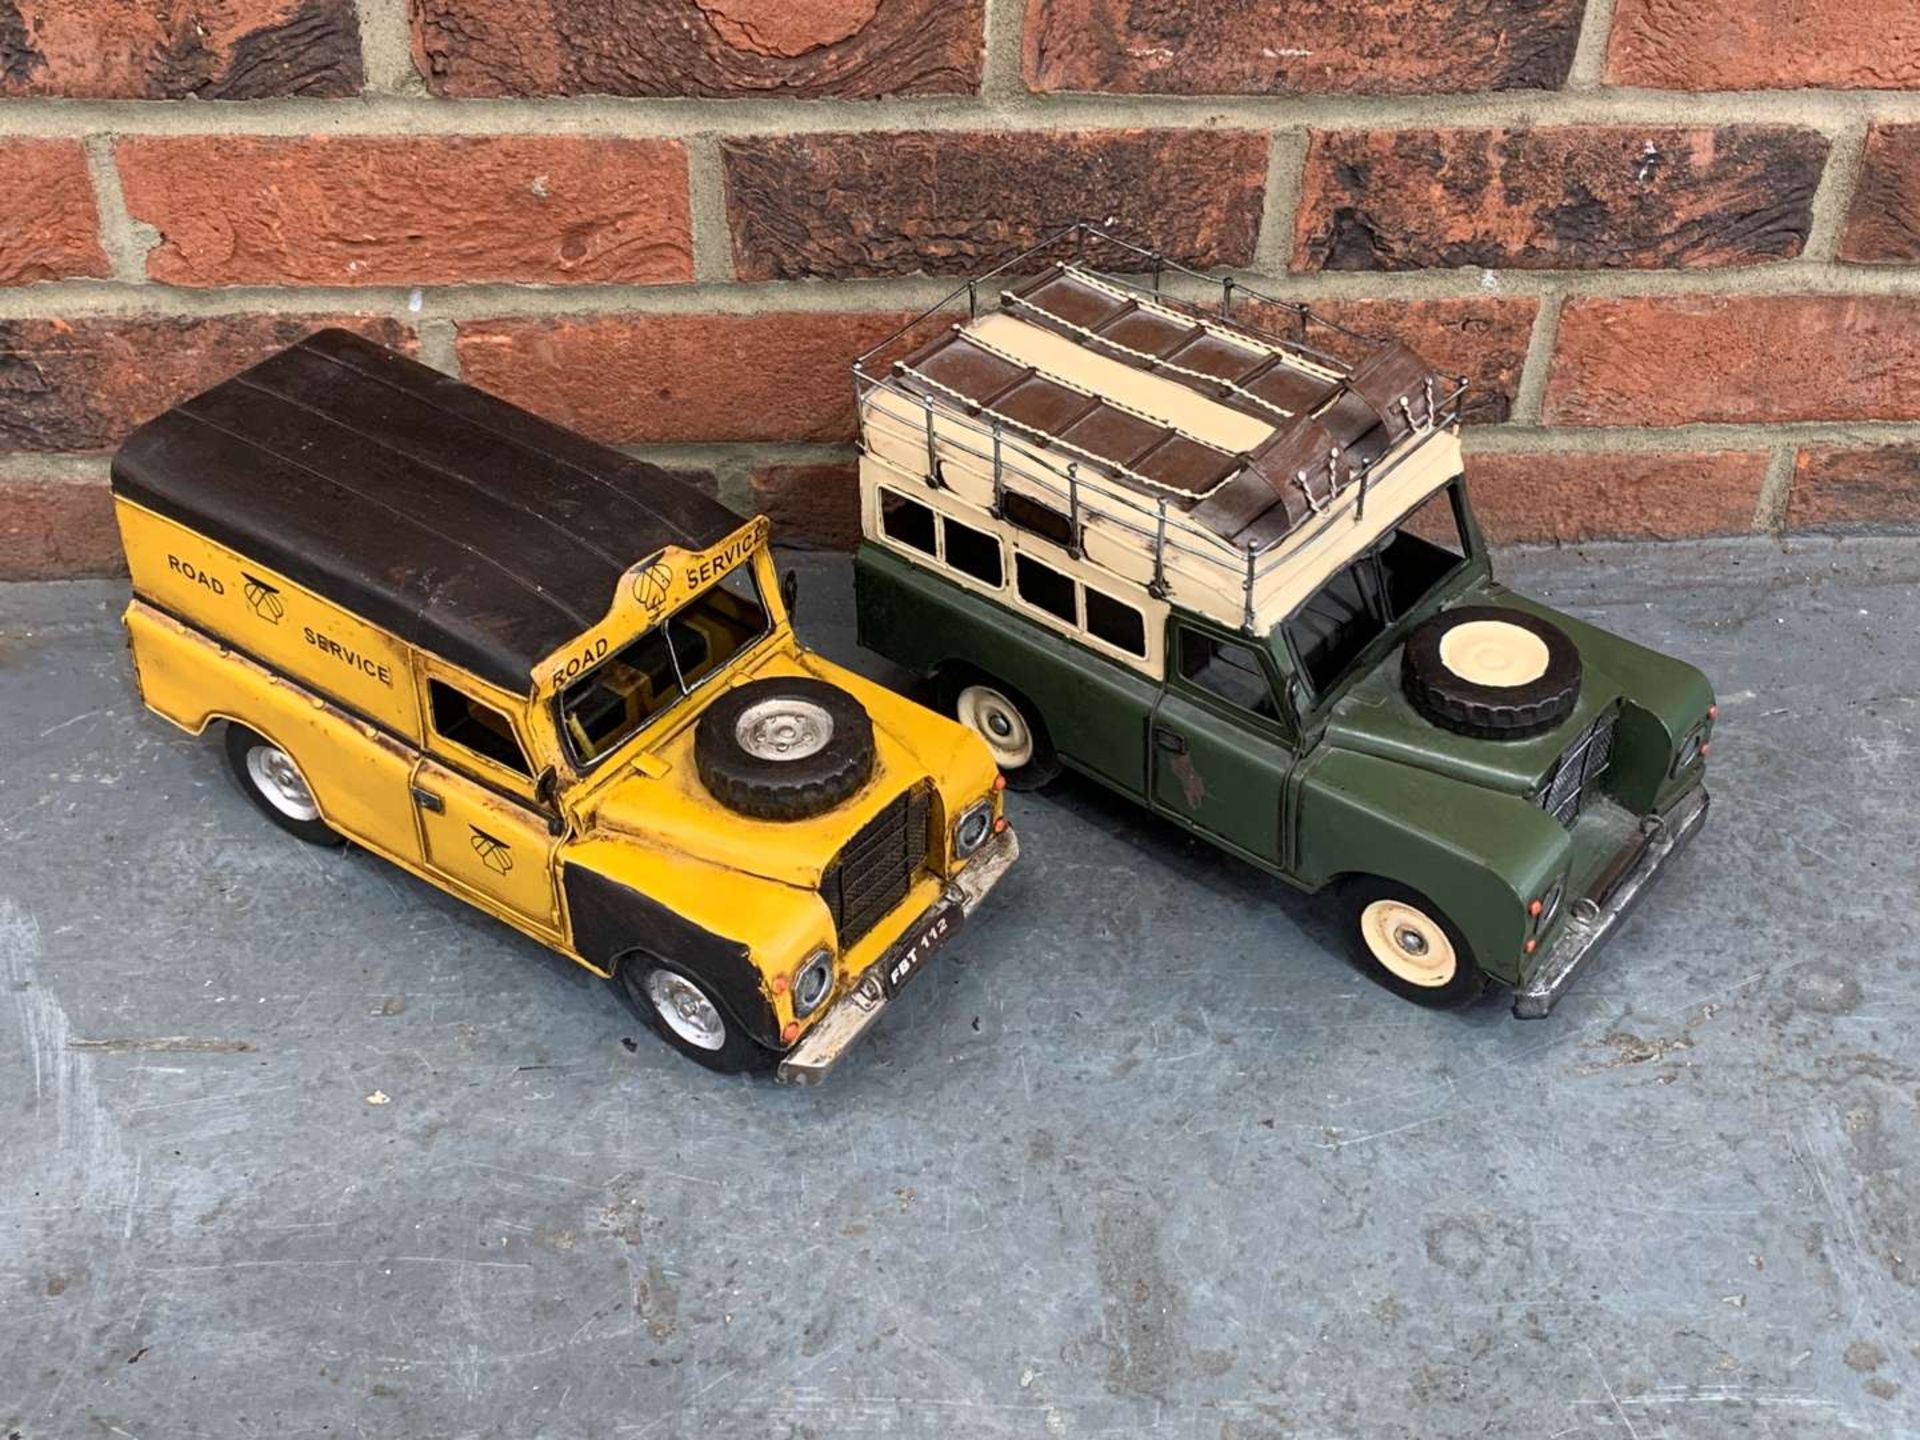 Two Modern Metal Land Rover Model Cars - Image 2 of 3